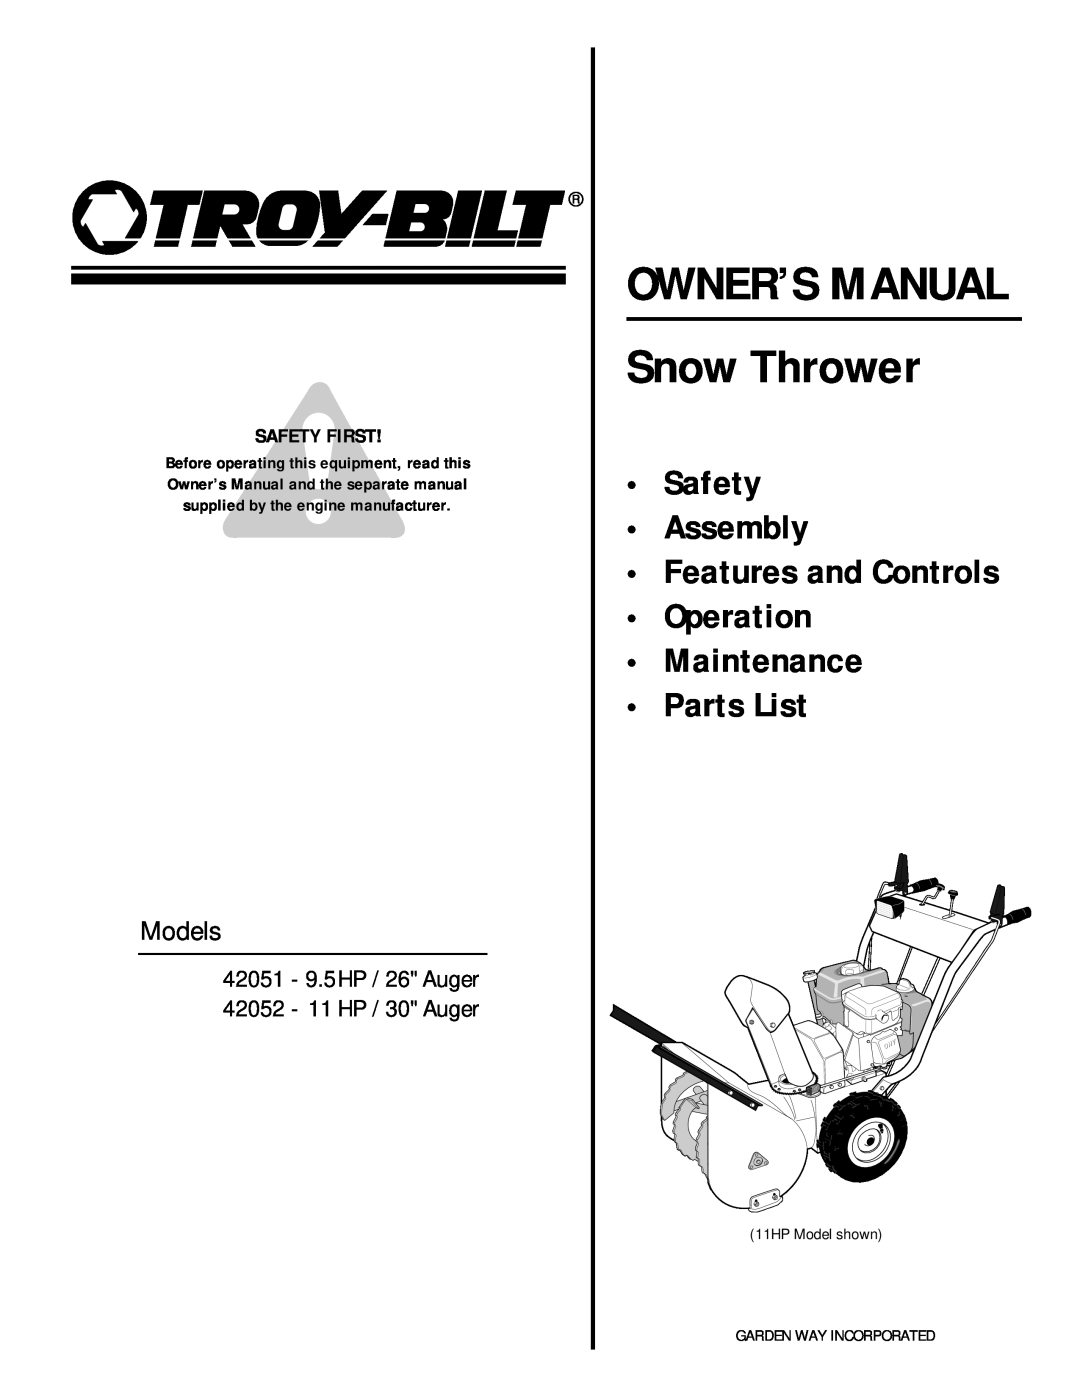 Troy-Bilt 42051 owner manual Safety Assembly Features and Controls Operation Maintenance, Parts List, Safety First, Models 